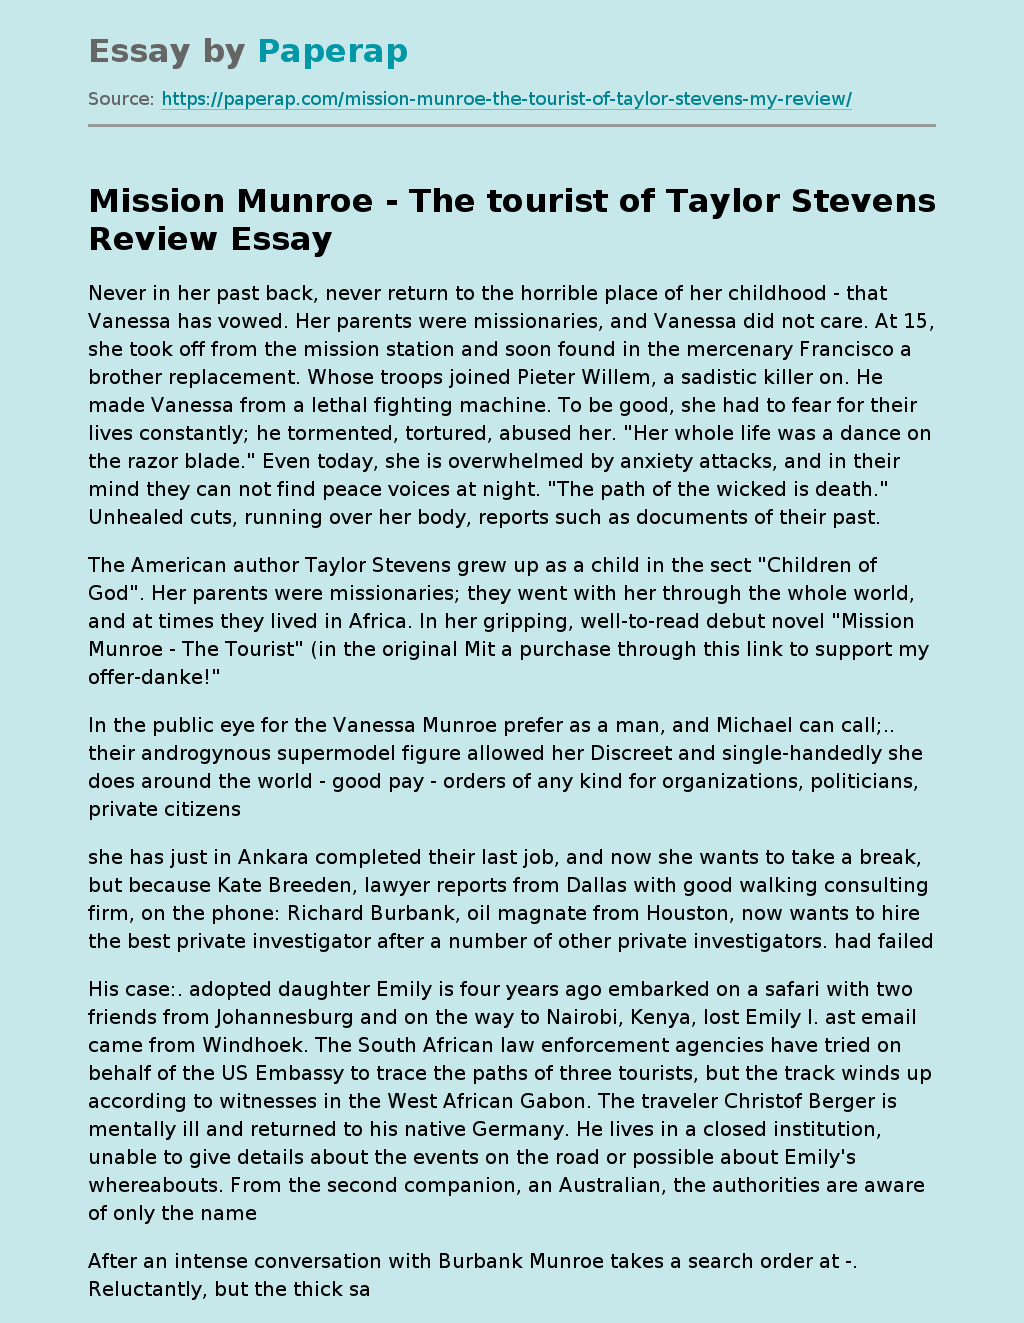 Mission Munroe - The tourist of Taylor Stevens Review